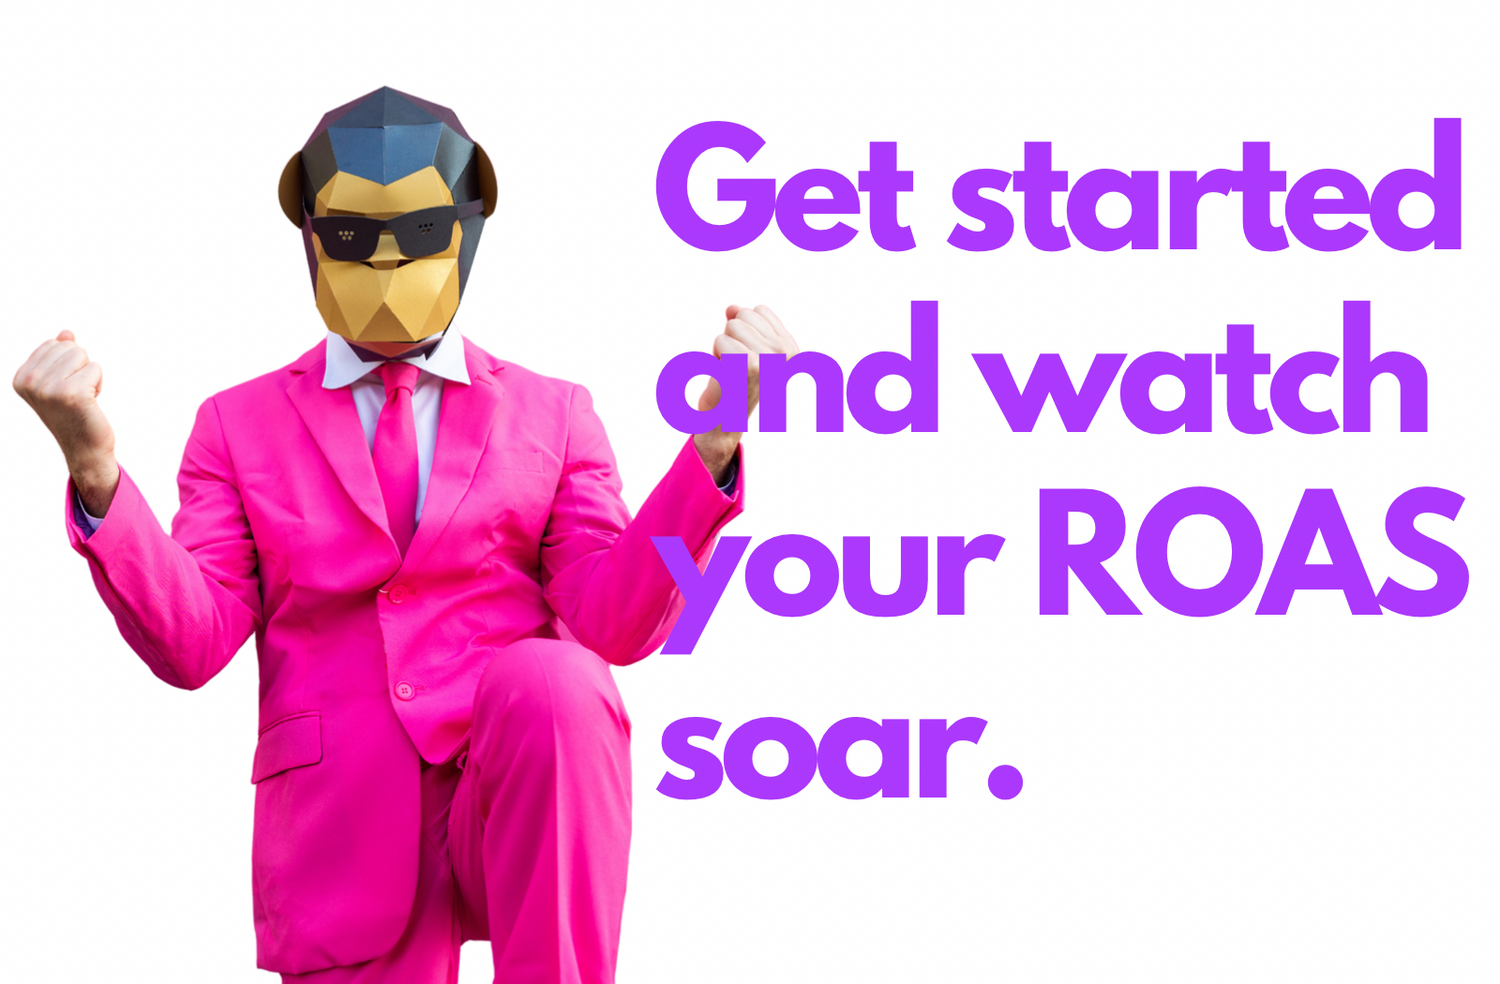 Popsixle Features Get started and watch your ROAS soar